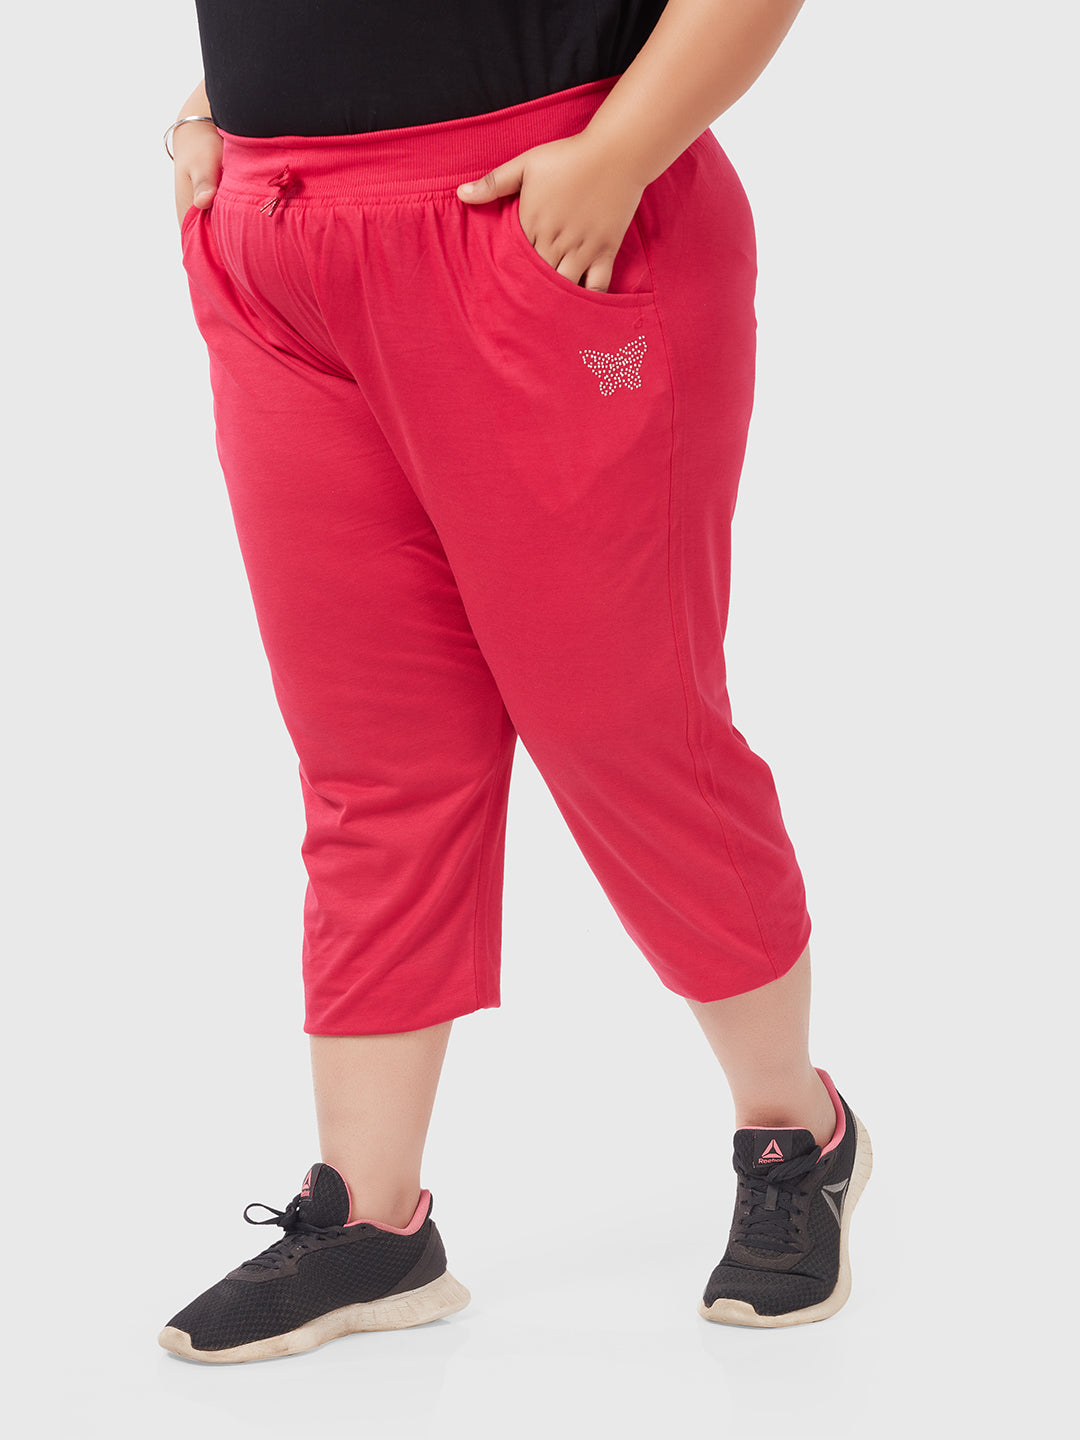 Stylish Pink Cotton Half Capris For Women online in India